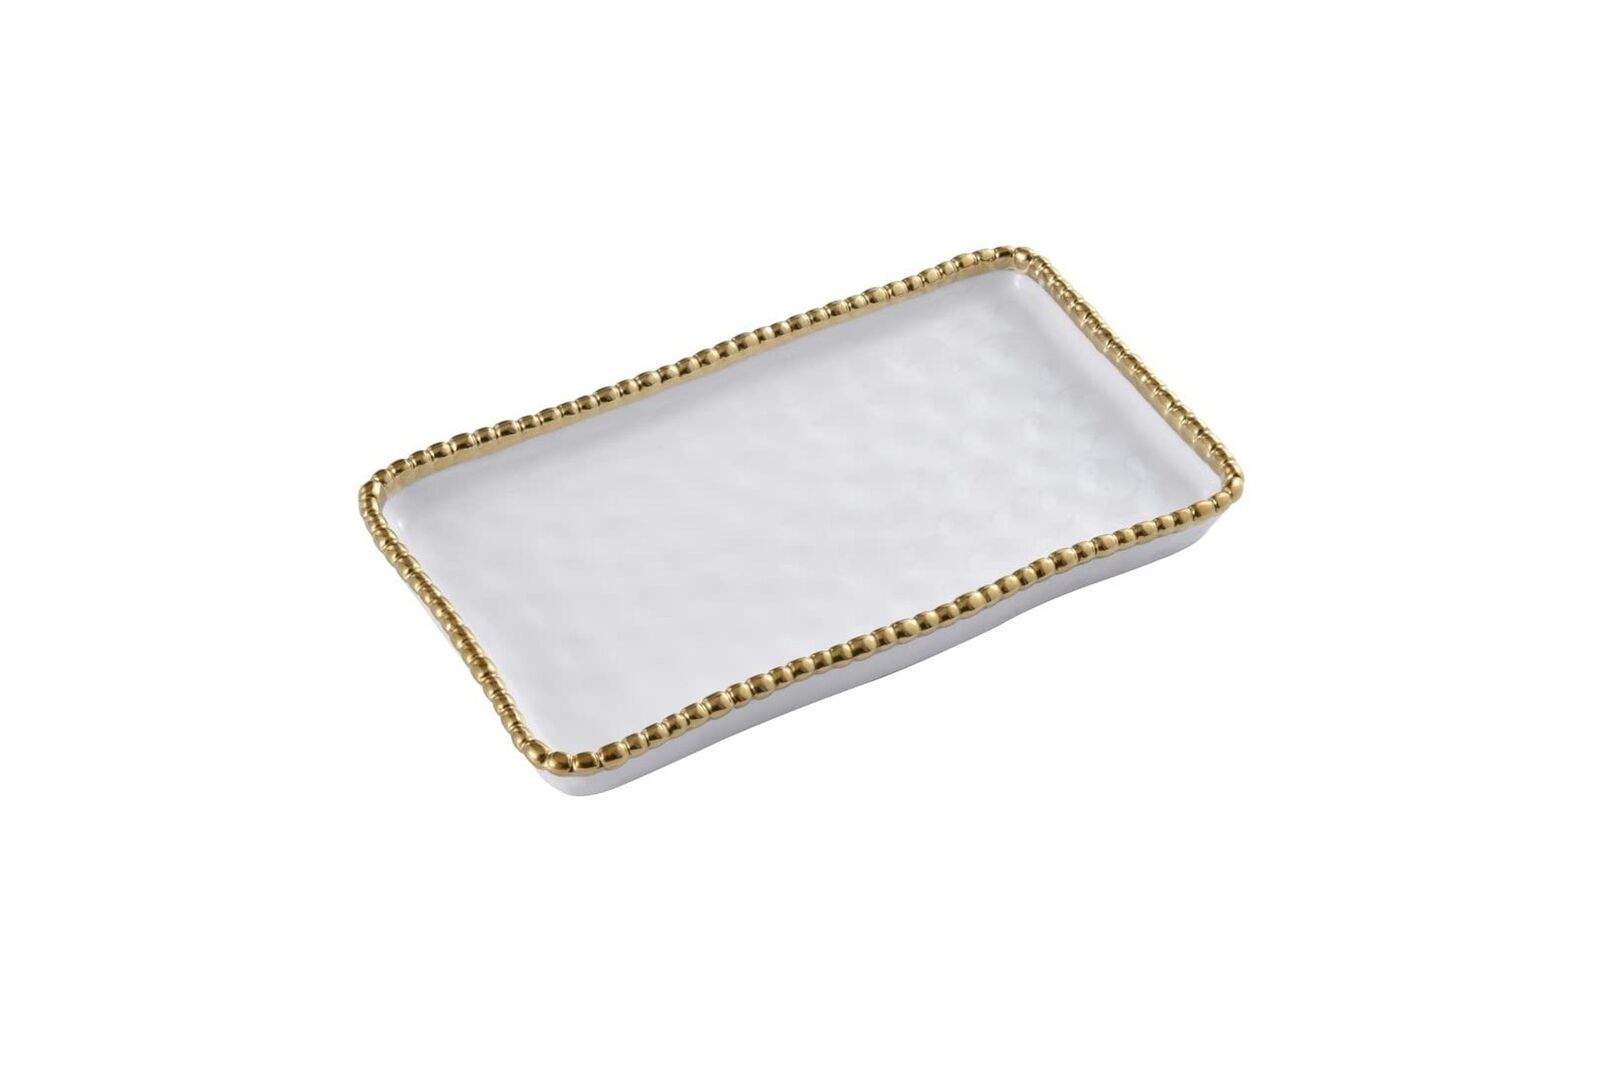 Pampa Bay Vanity Accessories with Gold Beads Rectangular Tray White and Gold